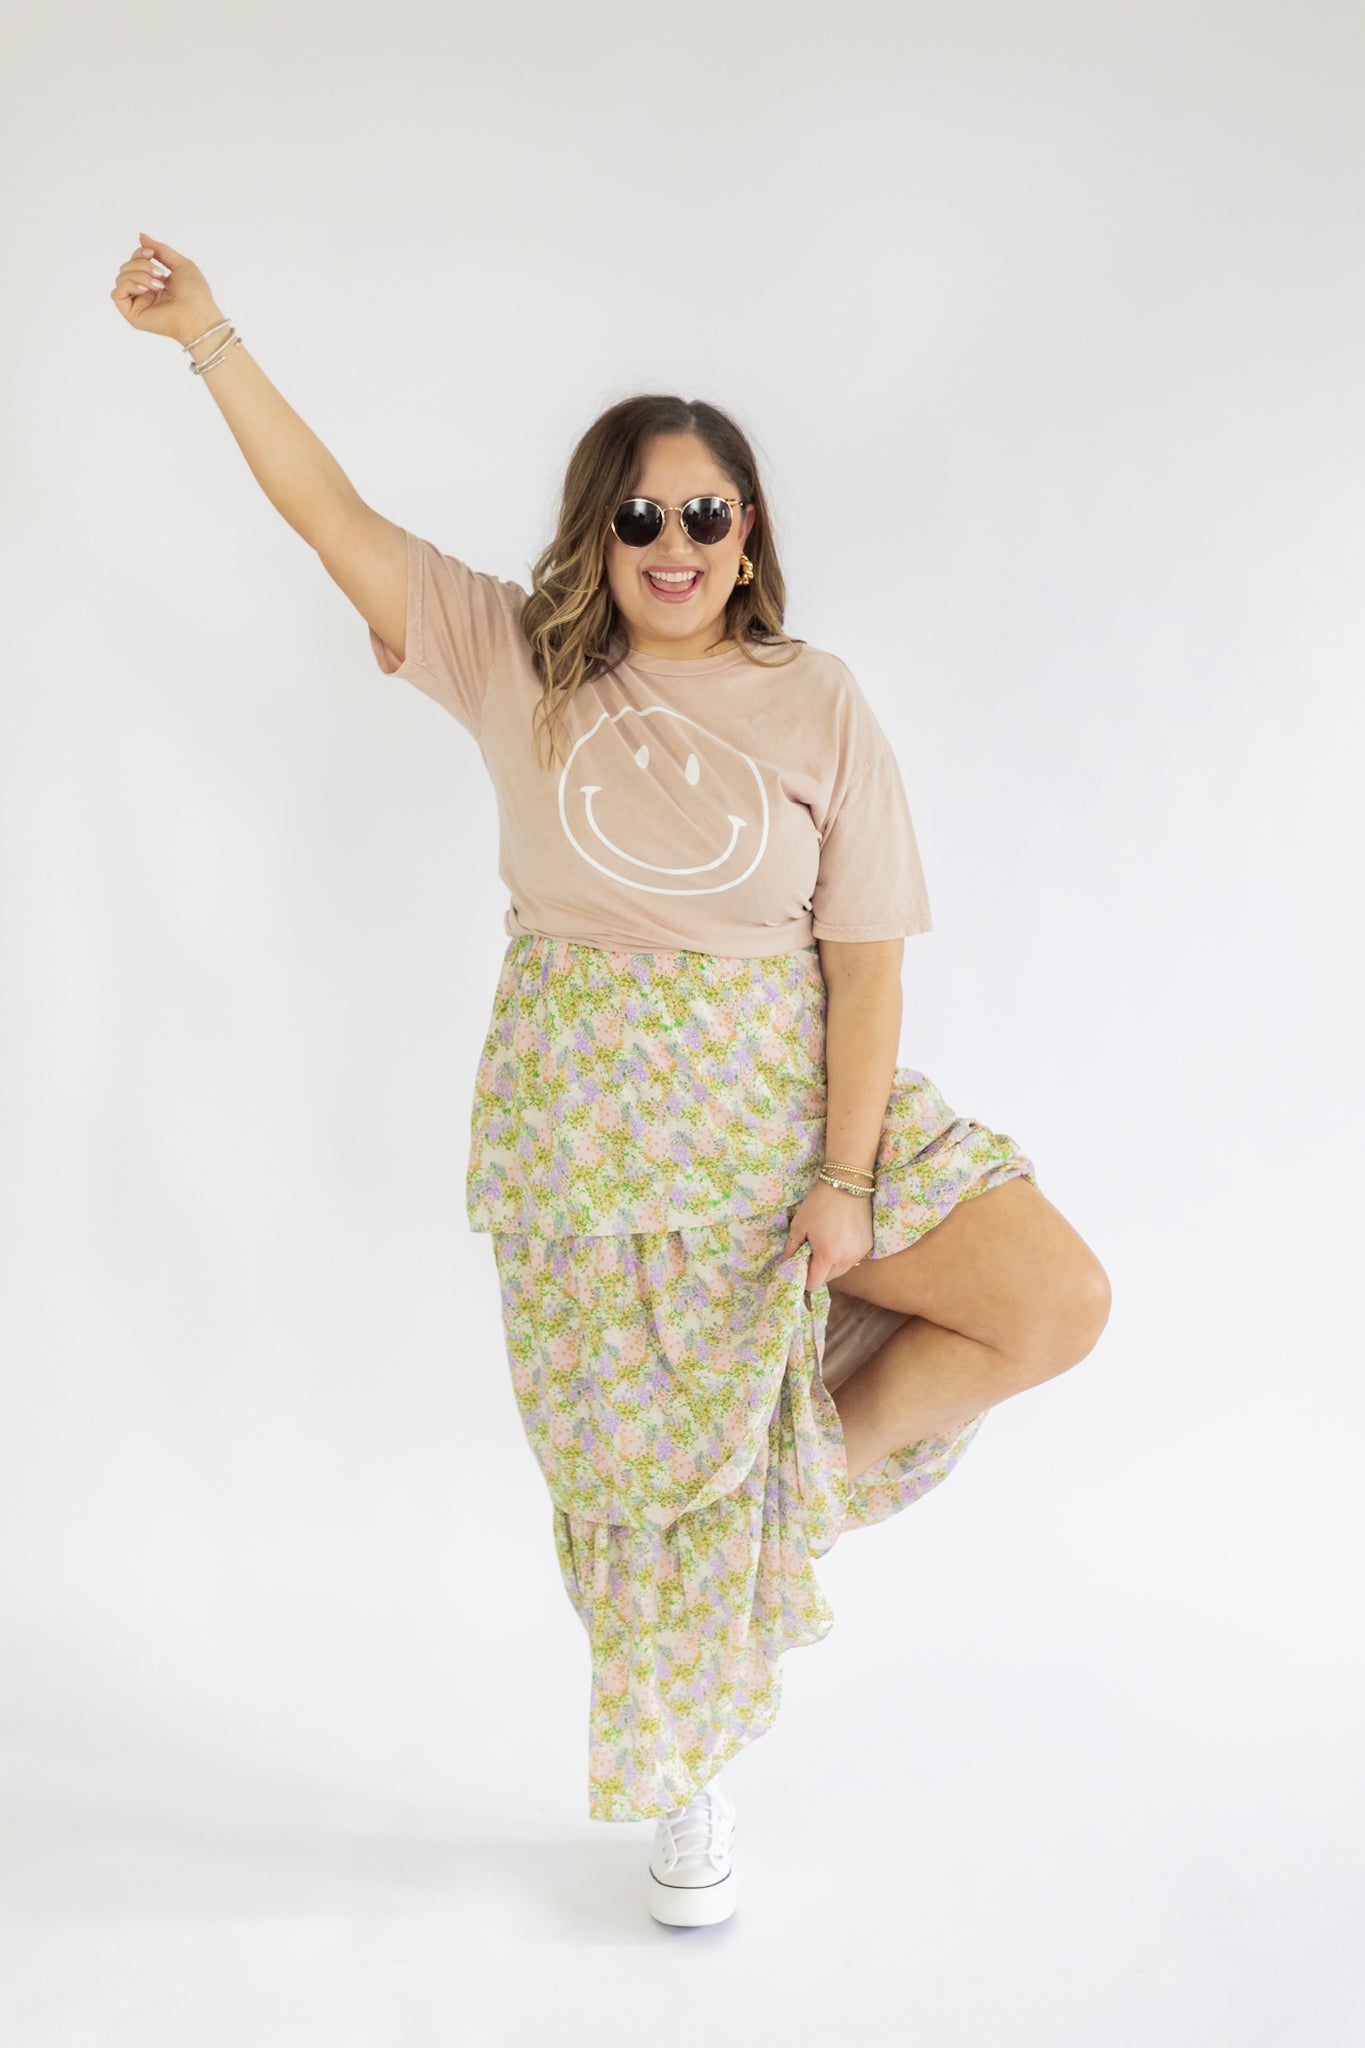 THE SMILEY FACE GRAPHIC TEE IN BLUSH